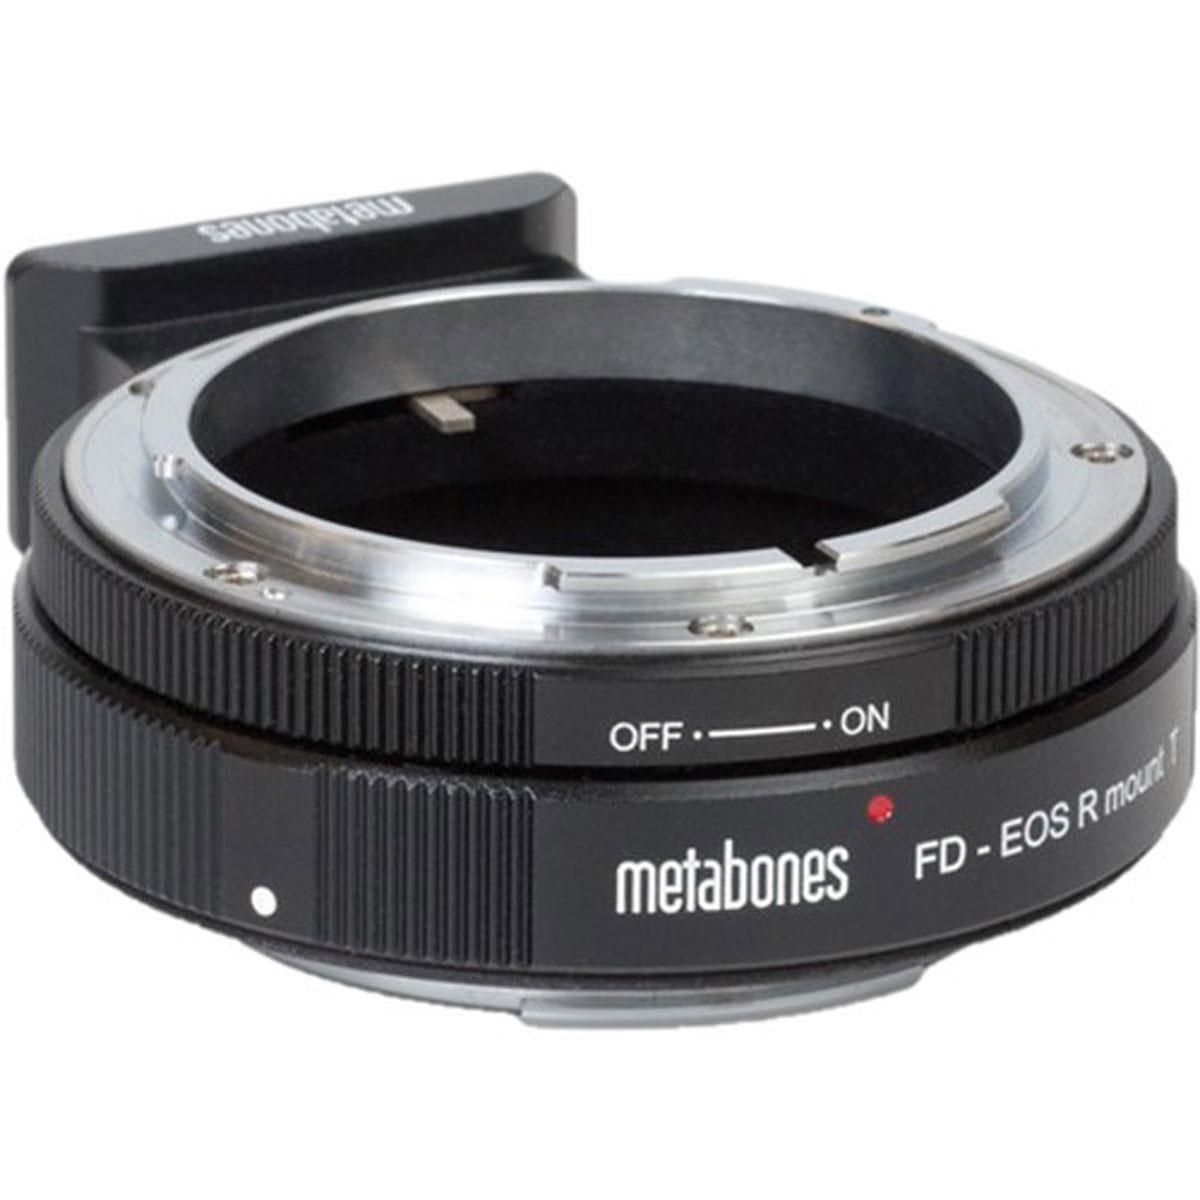 Photos - Teleconverter / Lens Mount Adapter Metabones Canon FD Lens to Canon EFR Mount T Adapter, EOS R MBFD-EFR-BT1 